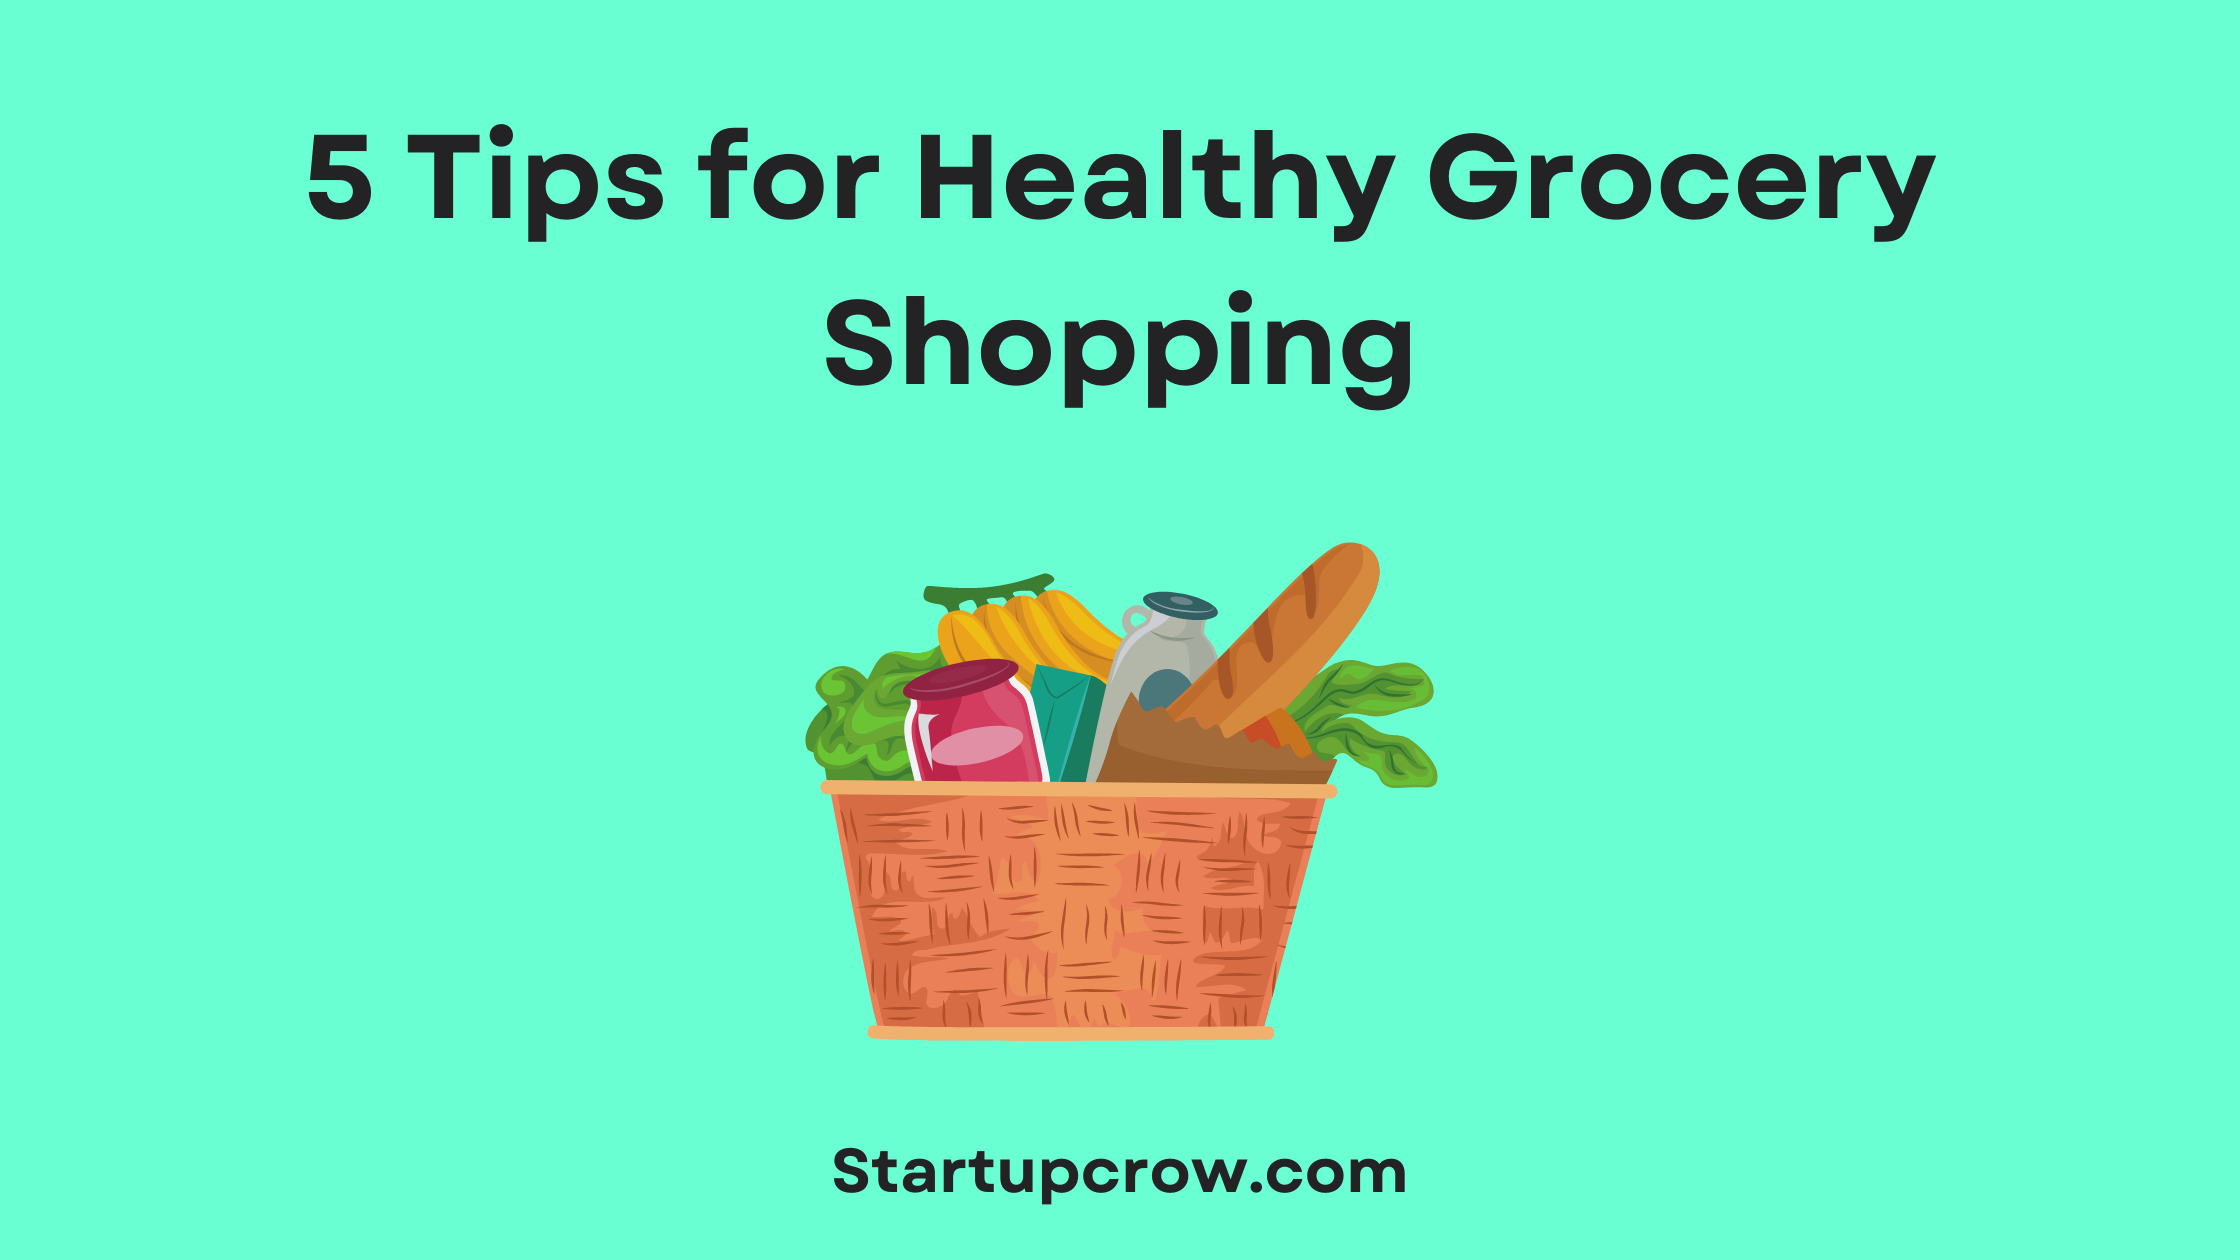 5 Tips for Healthy Grocery Shopping